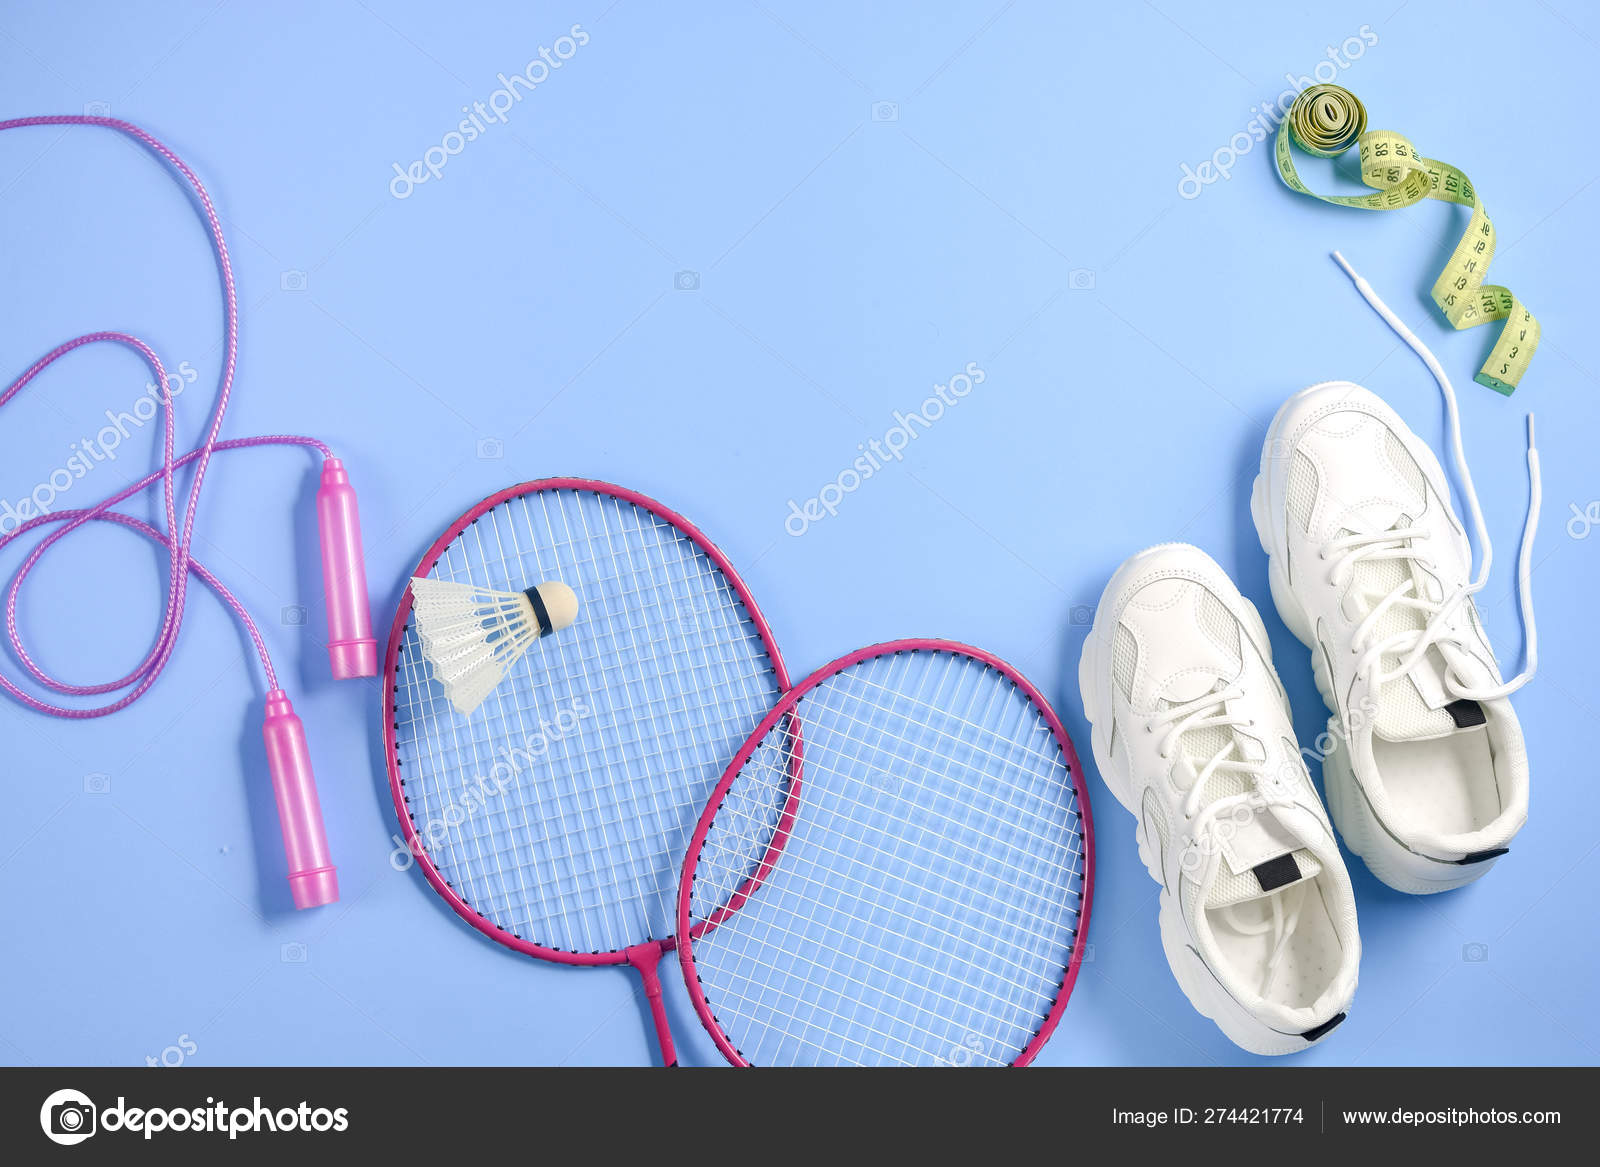 Sports flat lay with shuttlecock and badminton racket, skipping rope,  sneakers and measuring tape on purple background. Fitness, sport and  healthy lifestyle concept. Stock Photo by ©JuraJarema 274421774